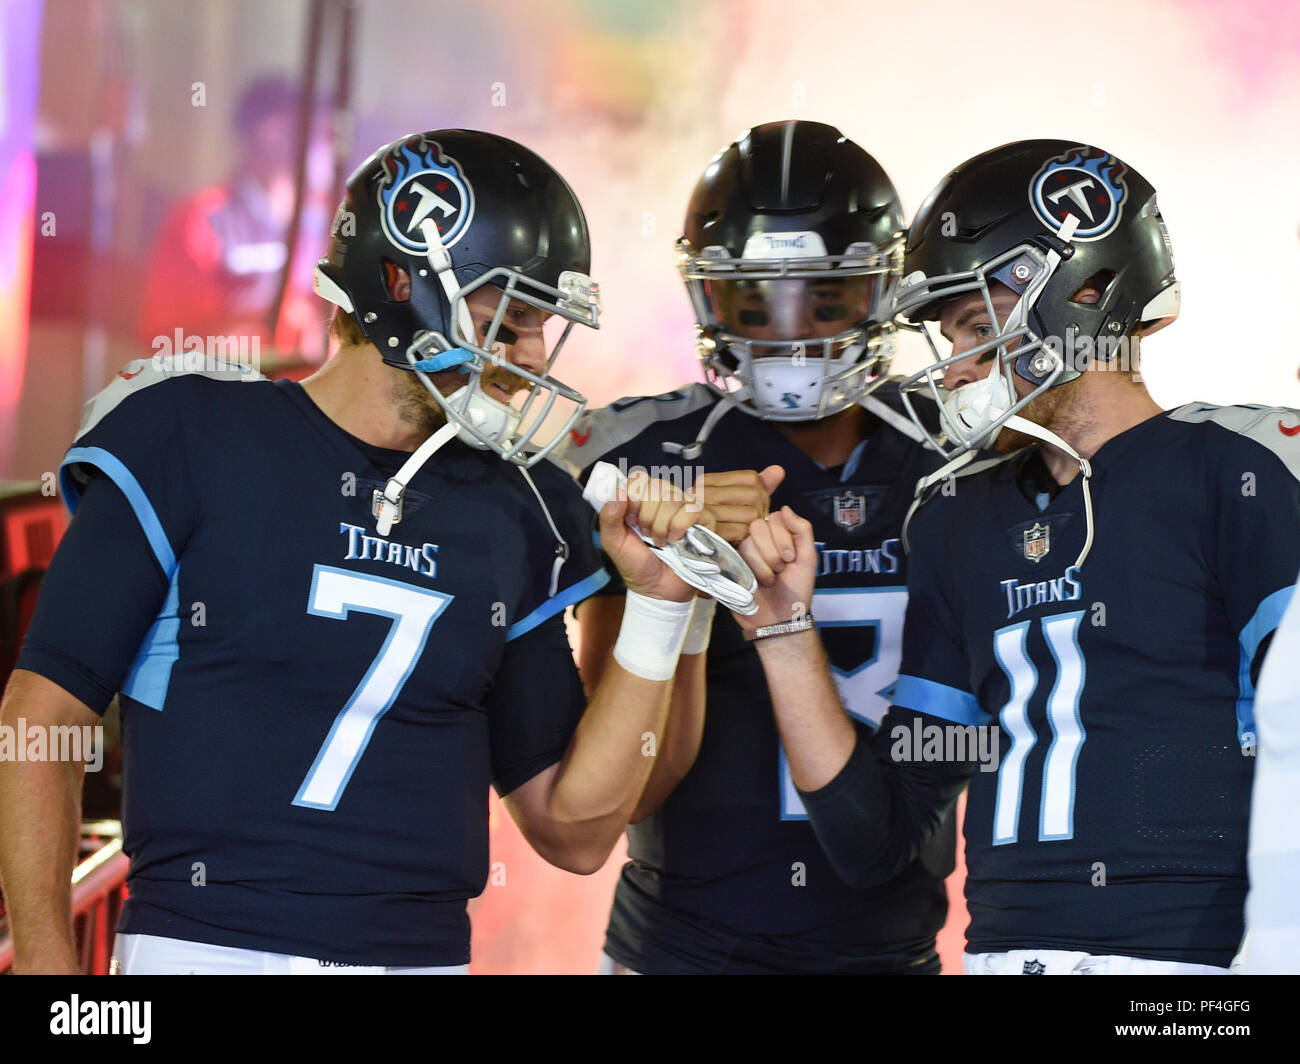 Nashville, USA. 18 August 2018. Tennessee Titans quarterback Blaine Gabbert  (7), Tennessee Titans quarterback Marcus Mariota (8), and Tennessee Titans  quarterback Luke Falk (11) get ready to head to the field during